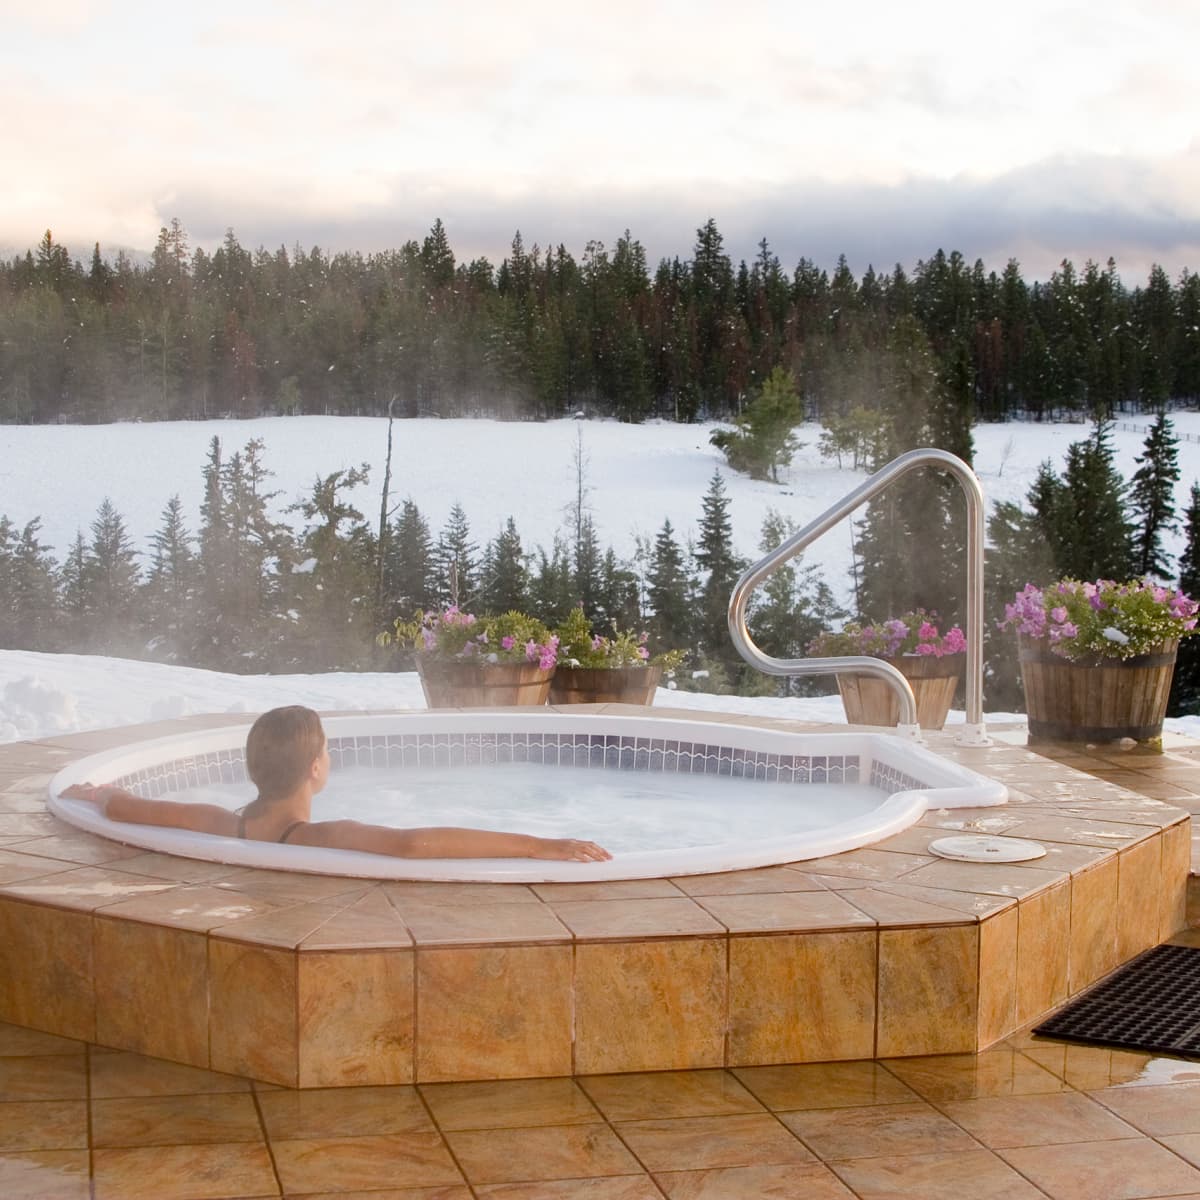 The Hot Tub Guru: Free Advice for First-Time Buyers - Dengarden